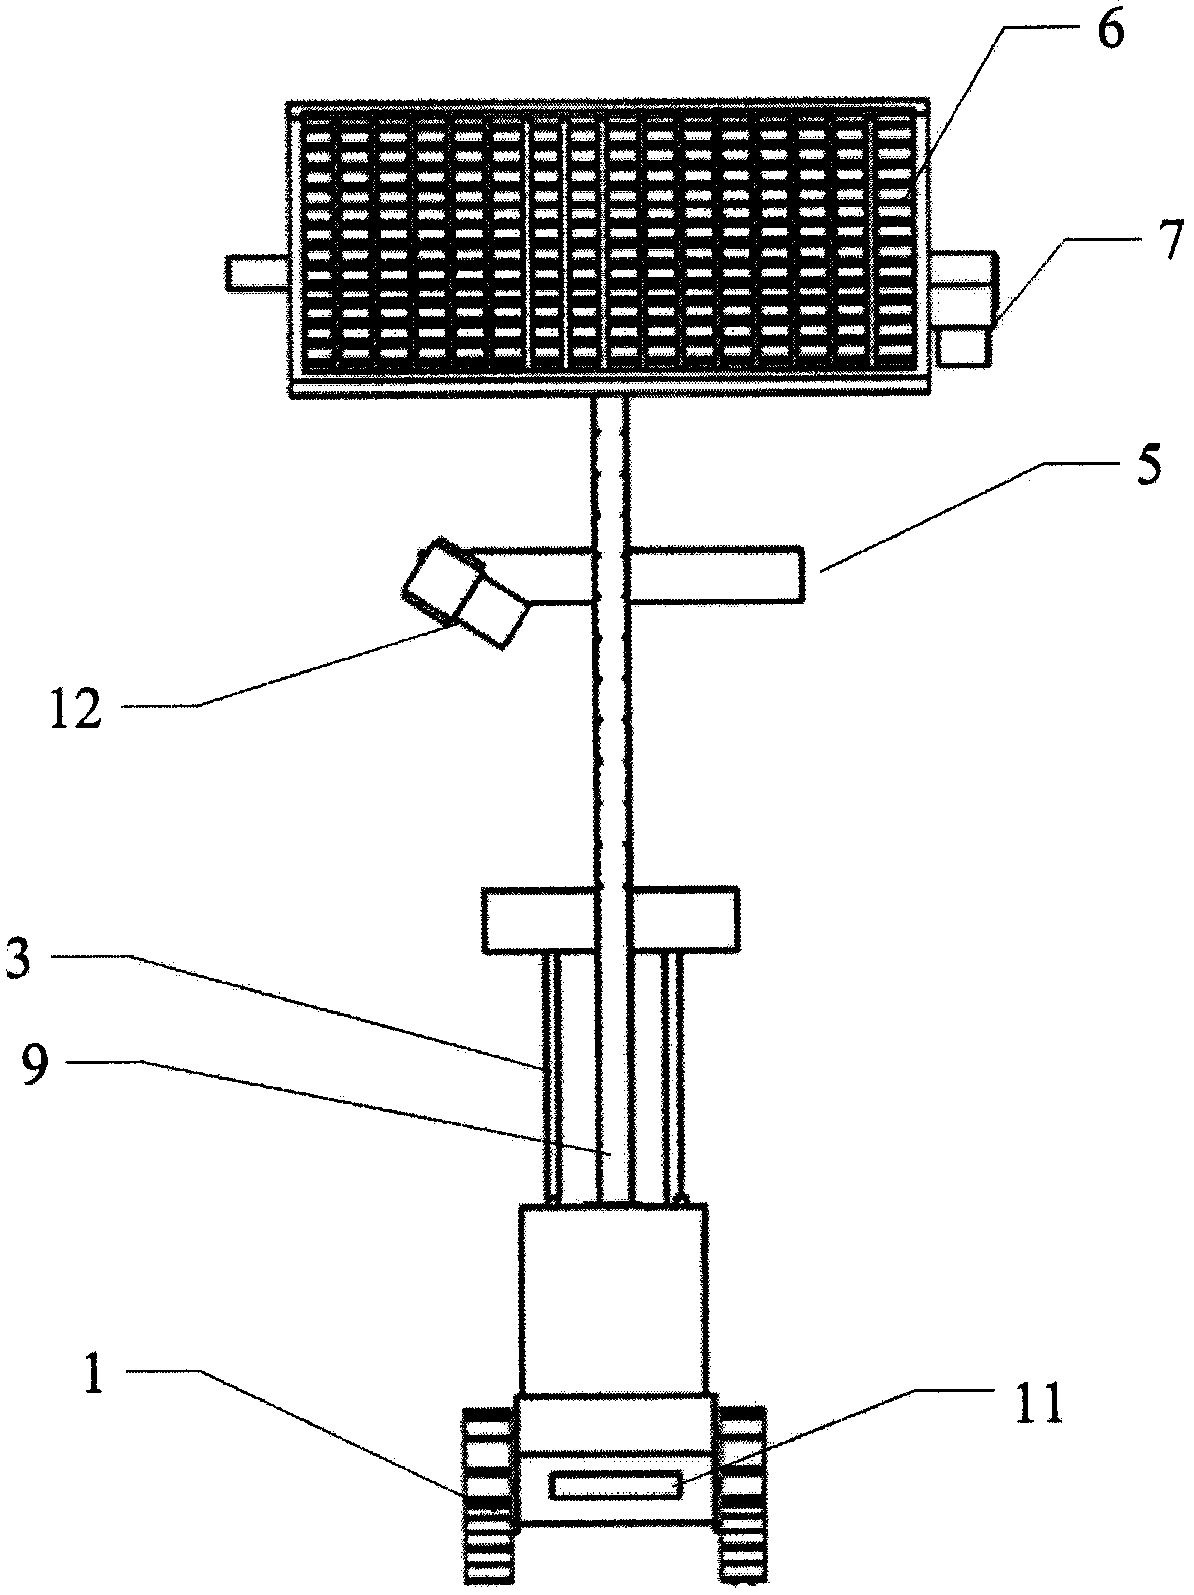 Automatic acquisition device and method for field information of crawler trolley